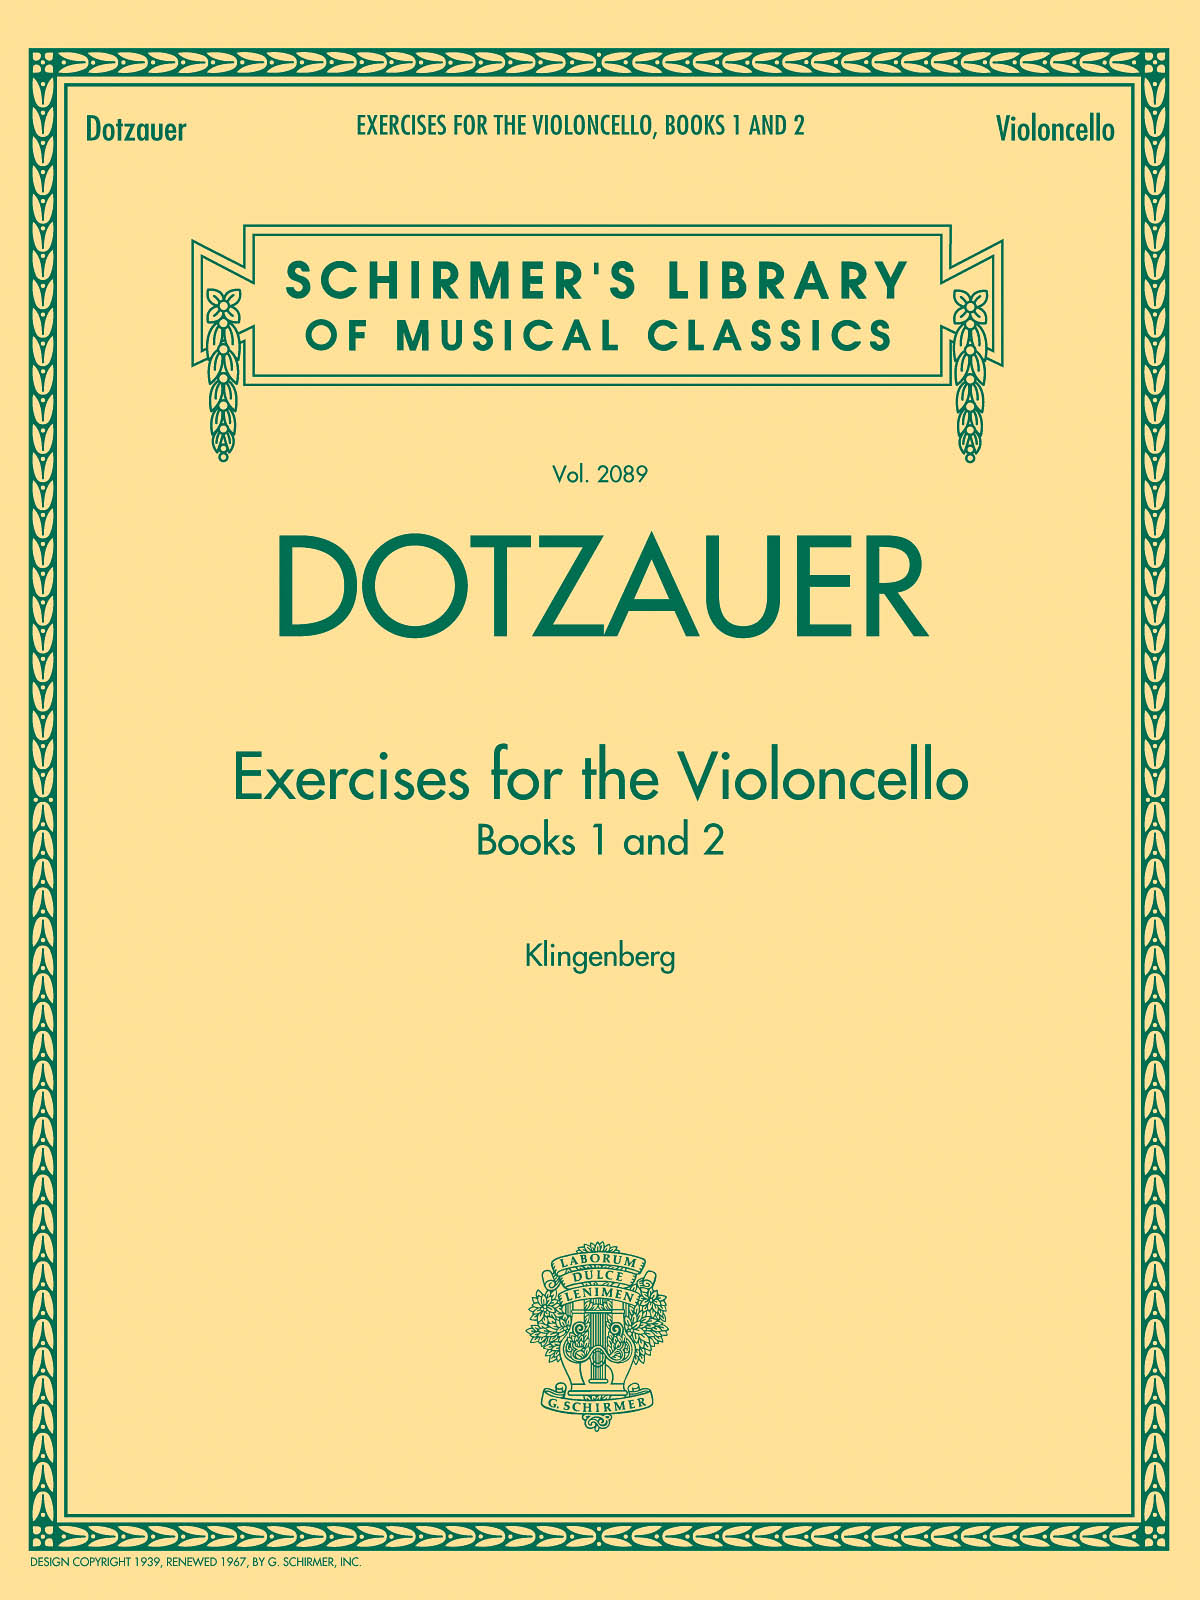 Friedrich Dotzauer: Exercises for the Violoncello +Books 1 and 2